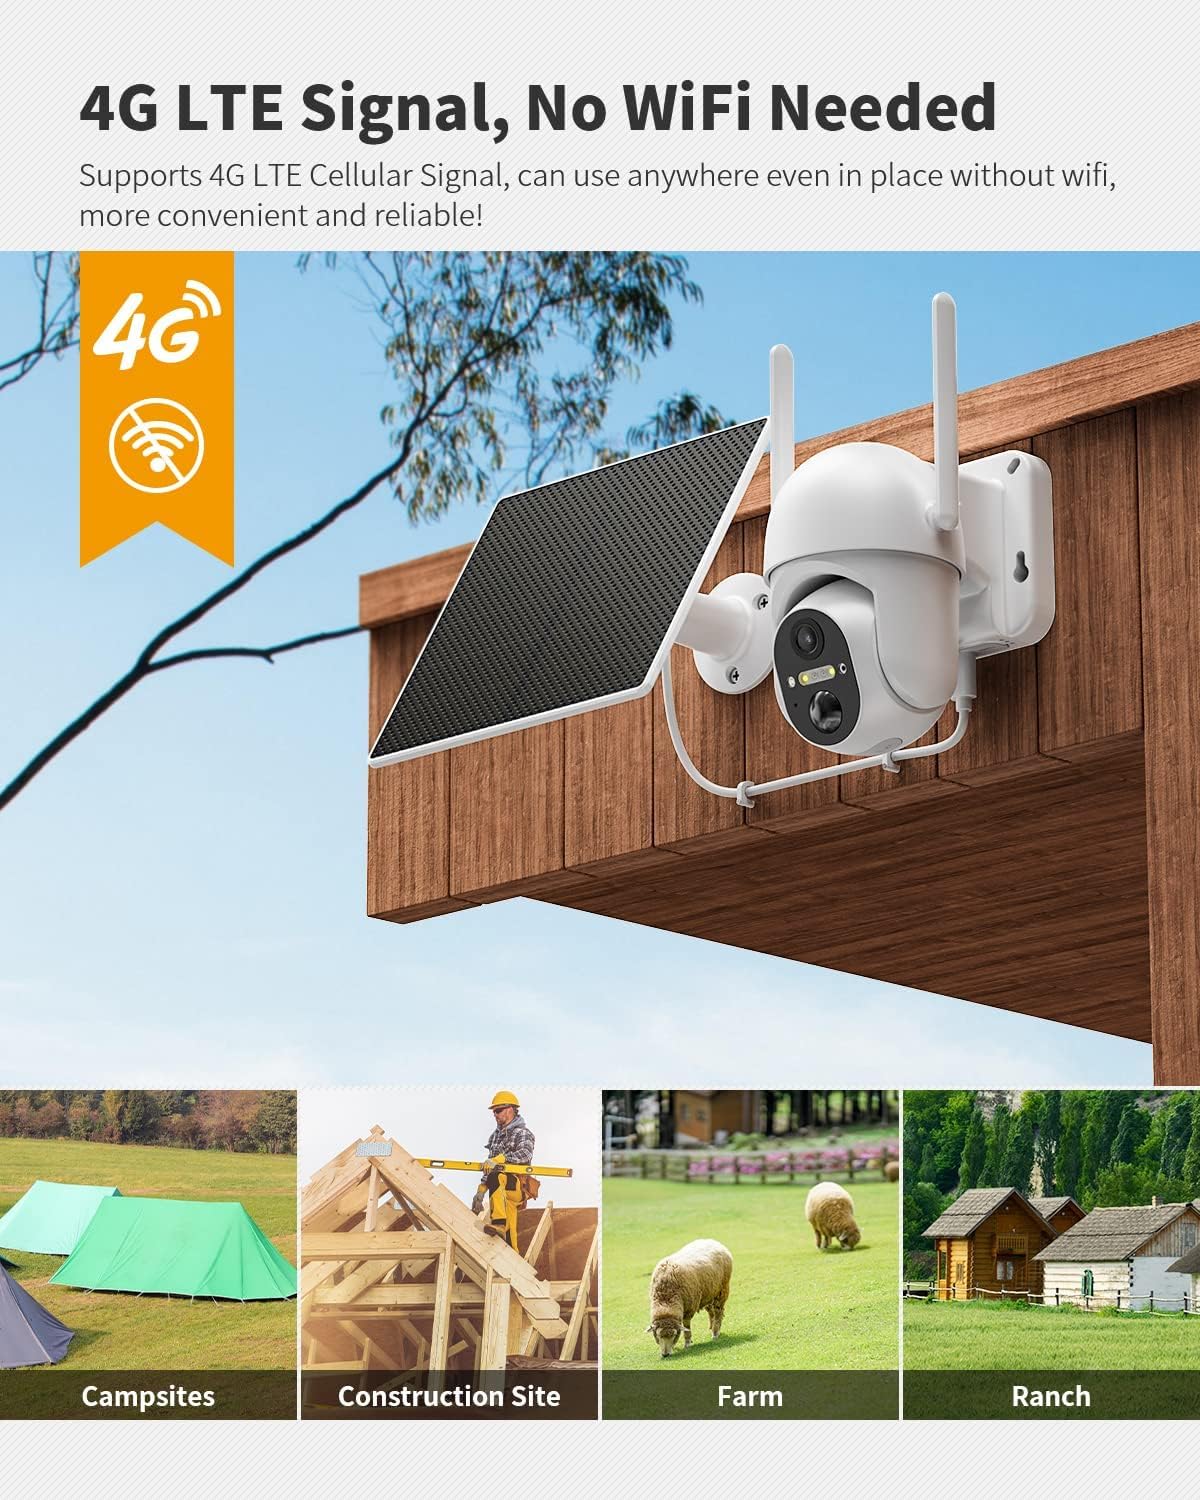 Ebitcam 4G LTE Cellular Security Cameras Include SD&SIM Card, Solar Powered Camera No WiFi Needed, 2K Live Video, 360° View, Color Night Vision, Motion&Siren Alert, Remote Access&Playback on Phone